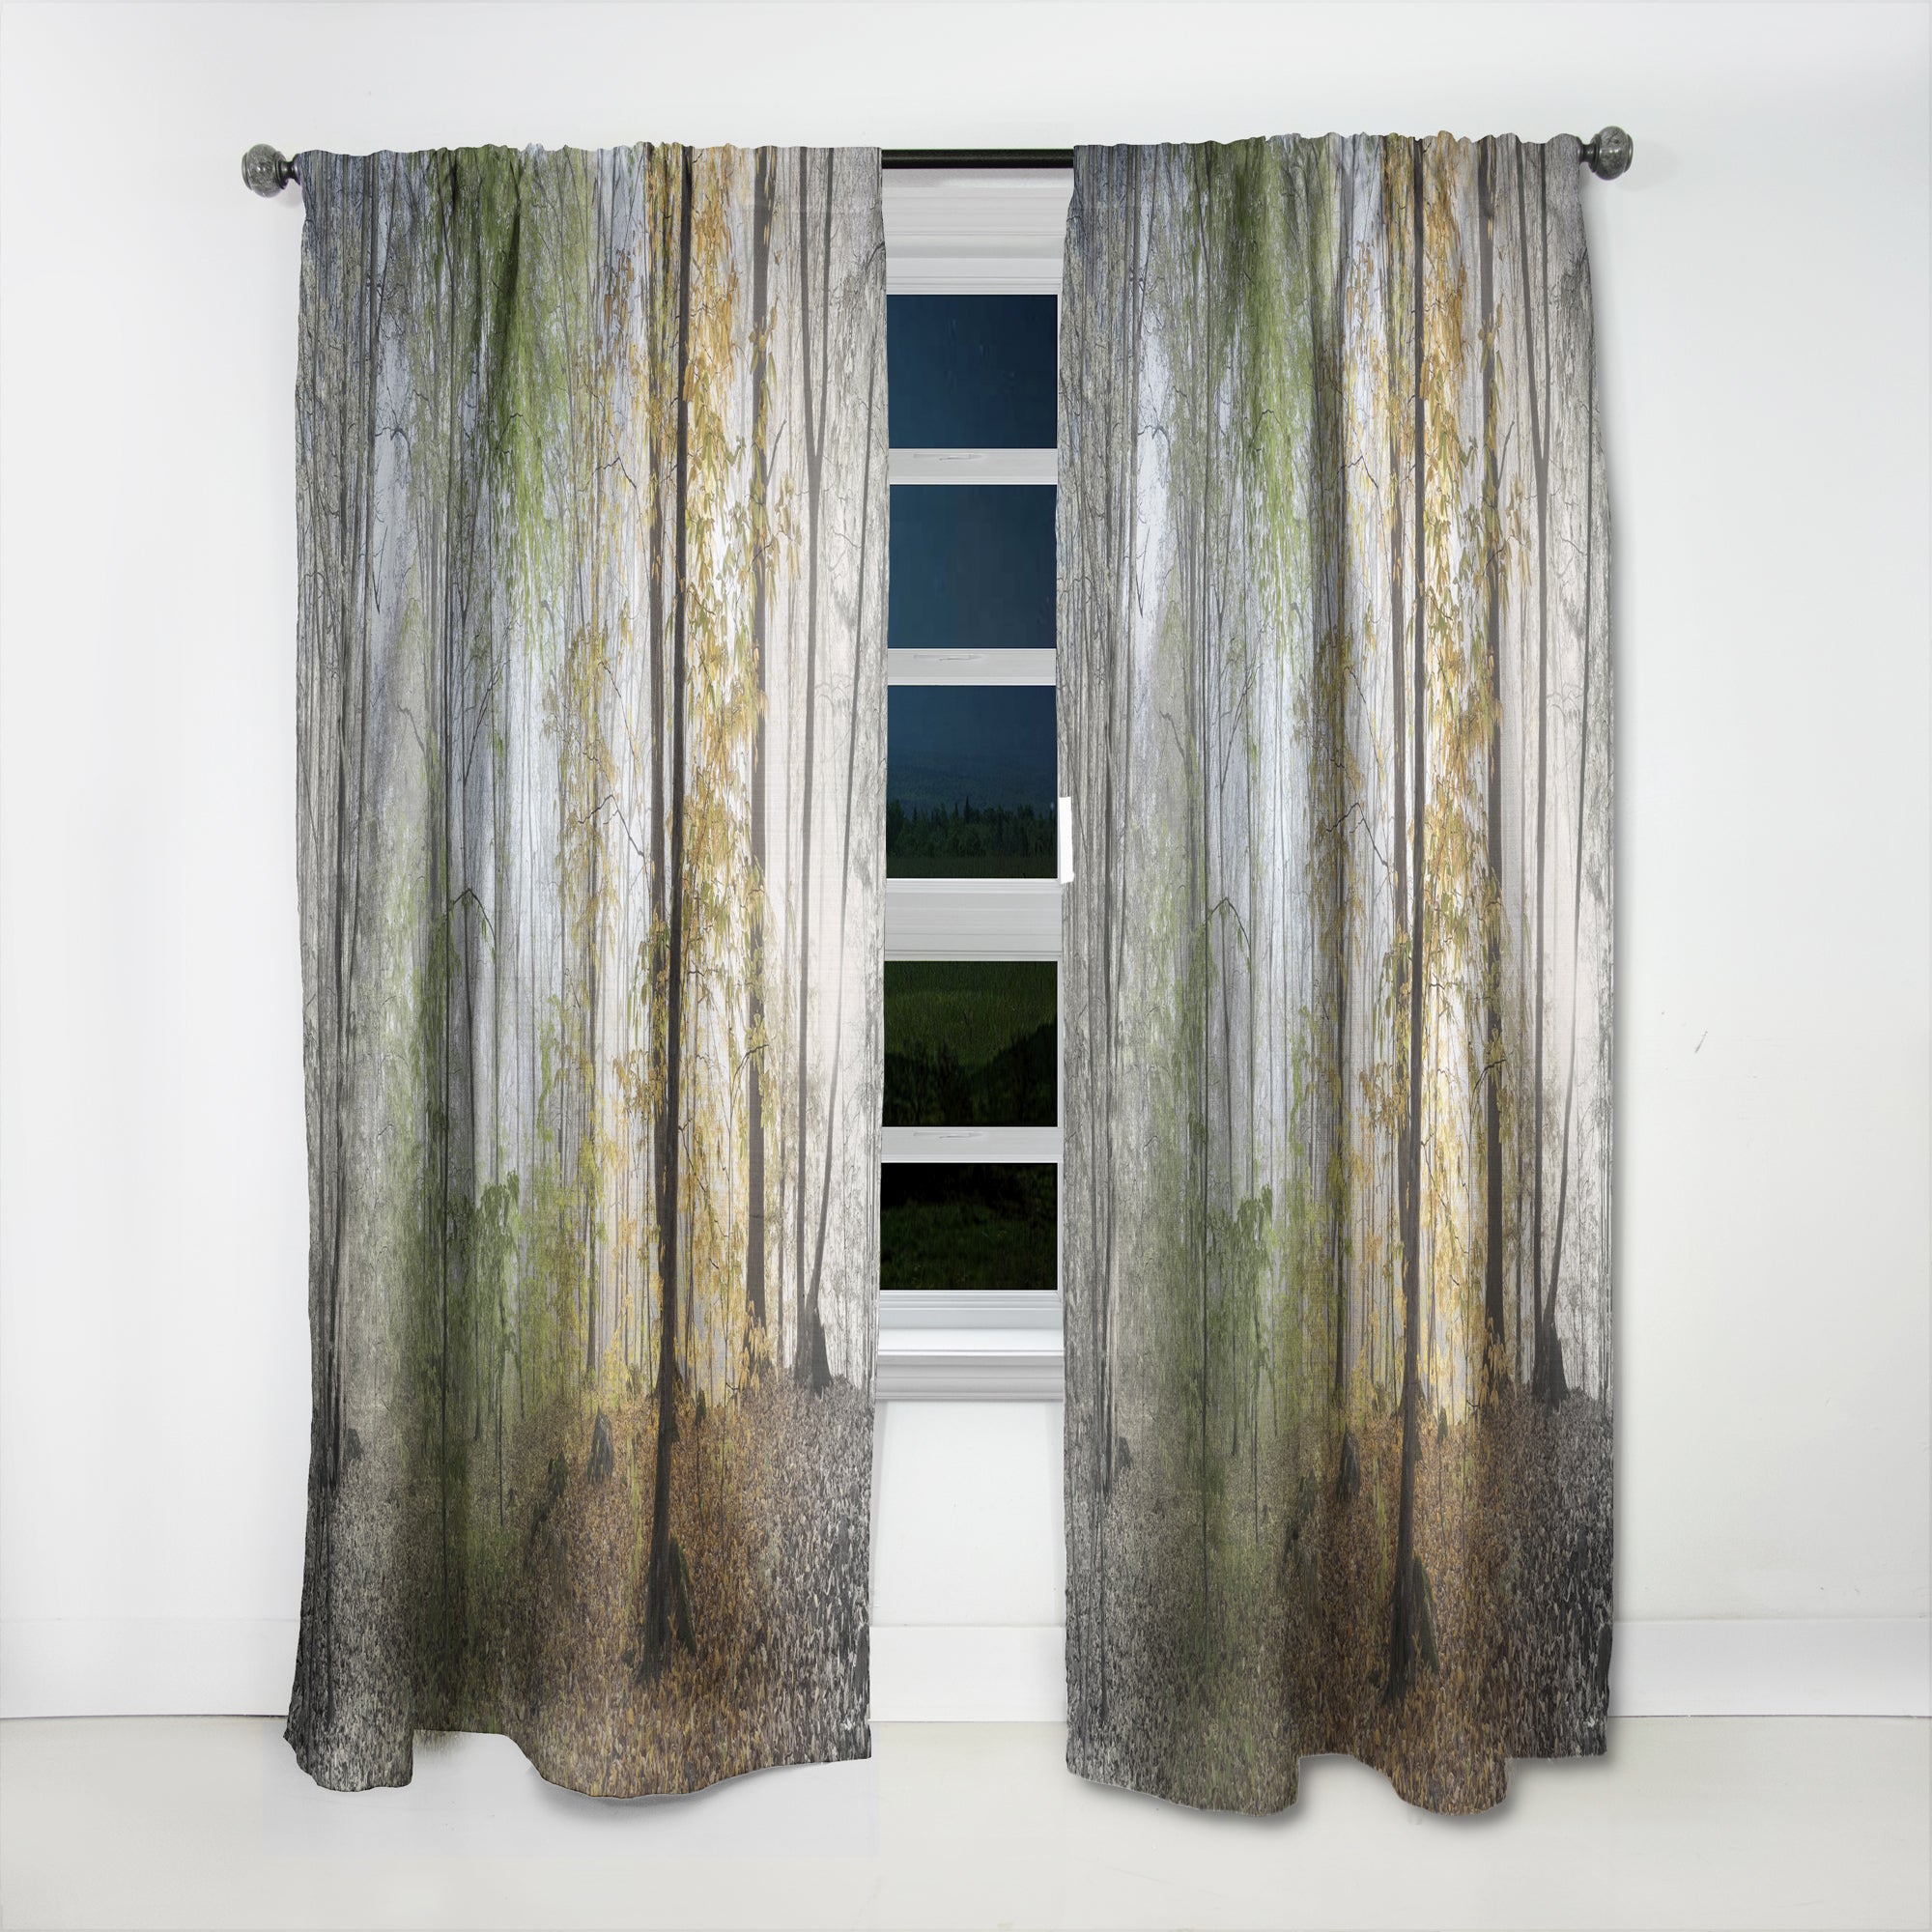 Designart 'Morning Forest Panoramic View' Landscape Curtain Panel